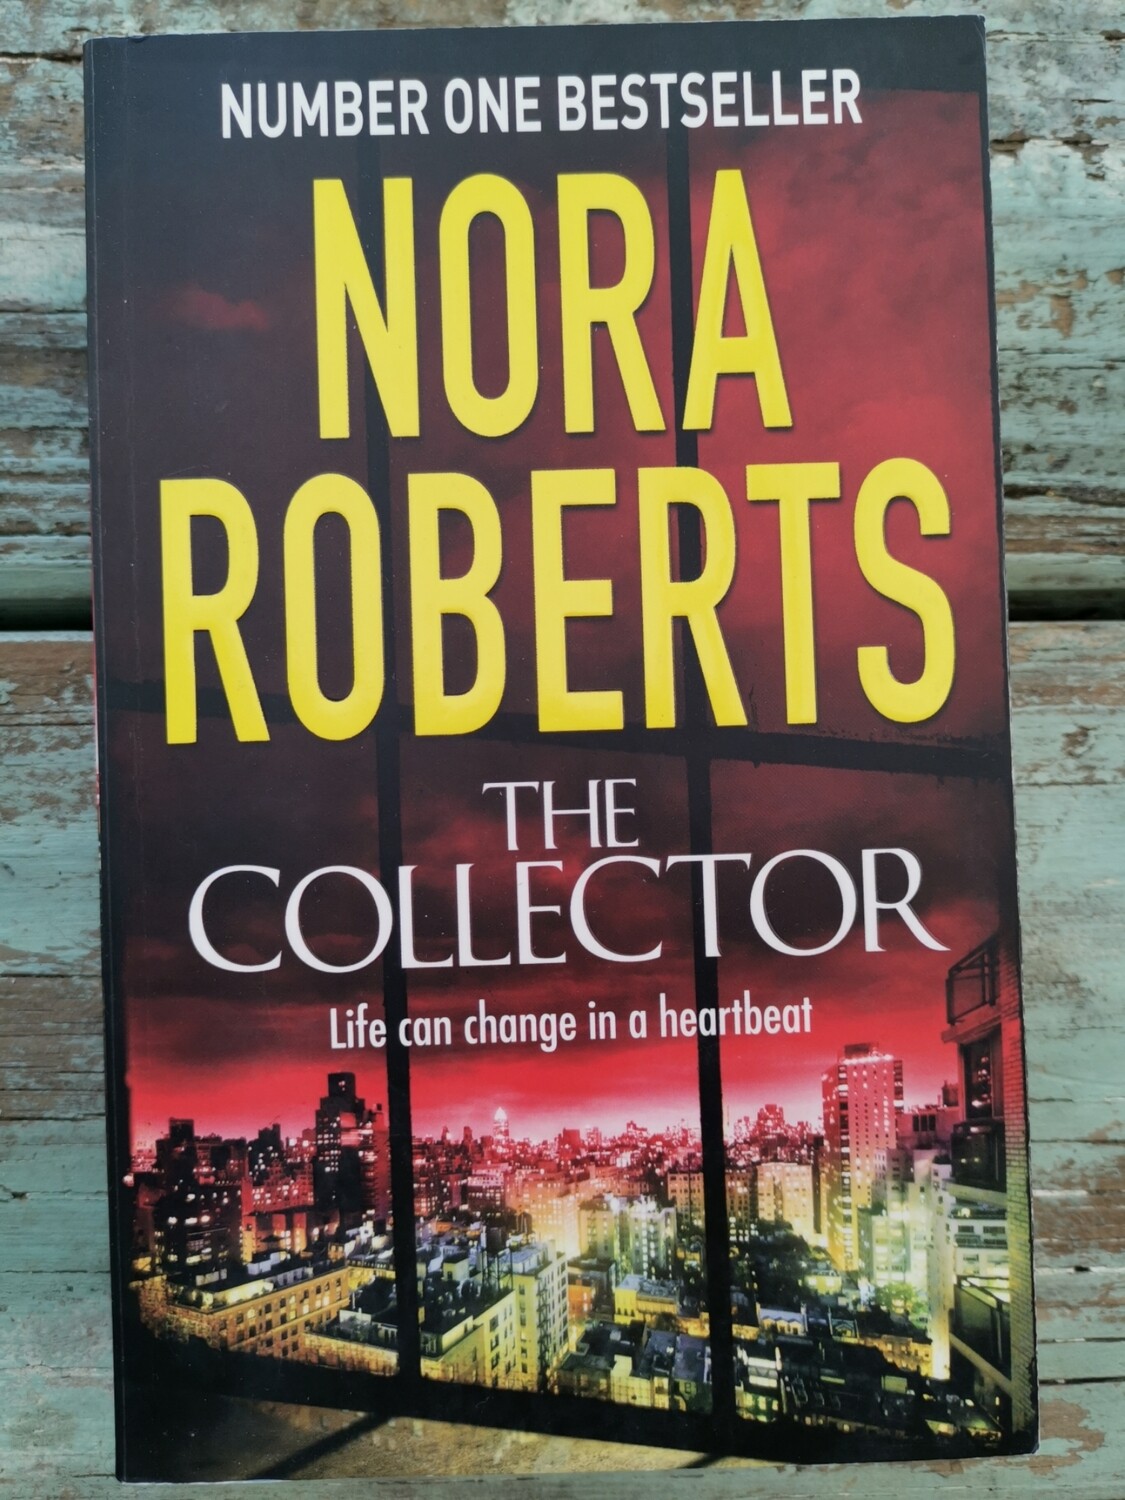 The collector, Nora Roberts